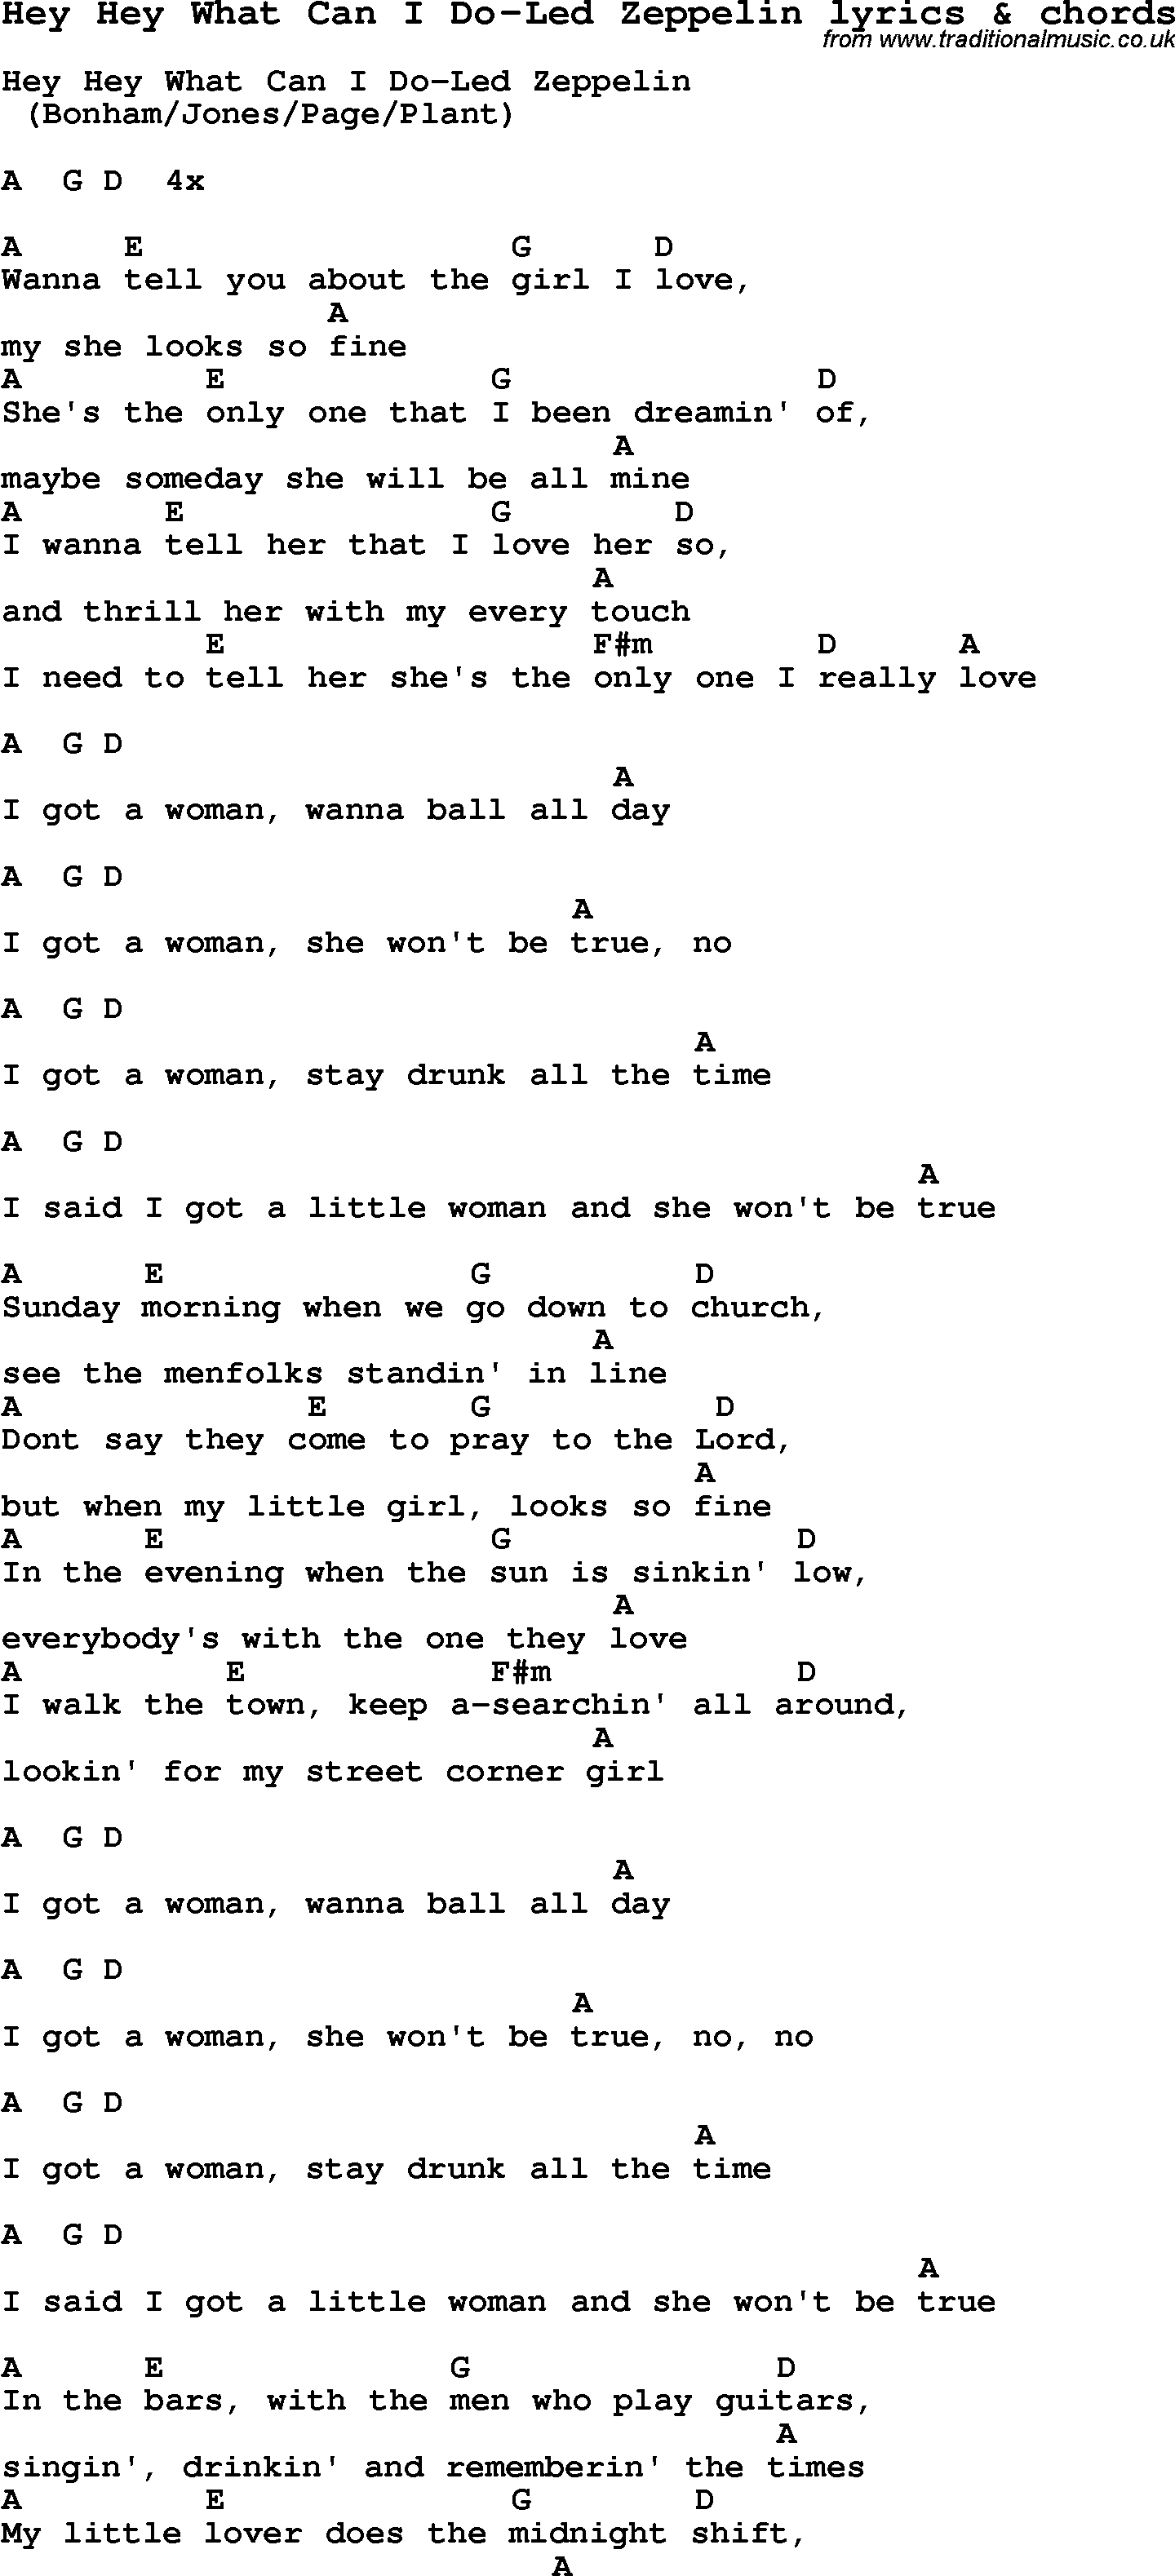 Love Song Lyrics for: Hey Hey What Can I Do-Led Zeppelin with chords for Ukulele, Guitar Banjo etc.